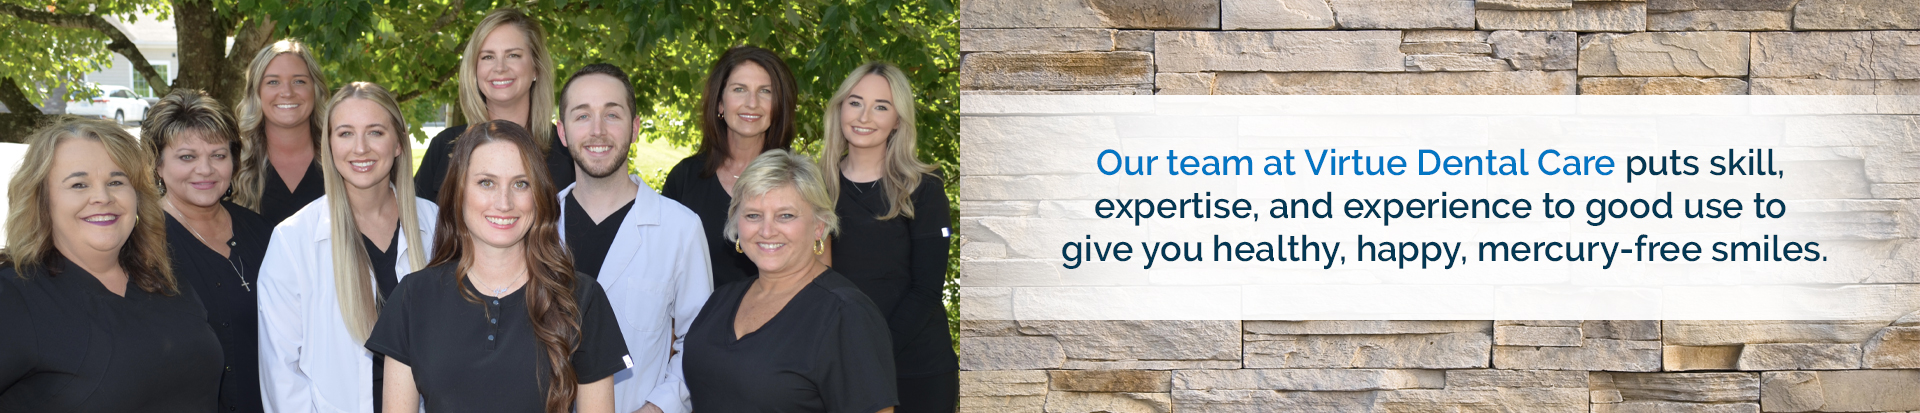 Our team at Virtue Dental Care